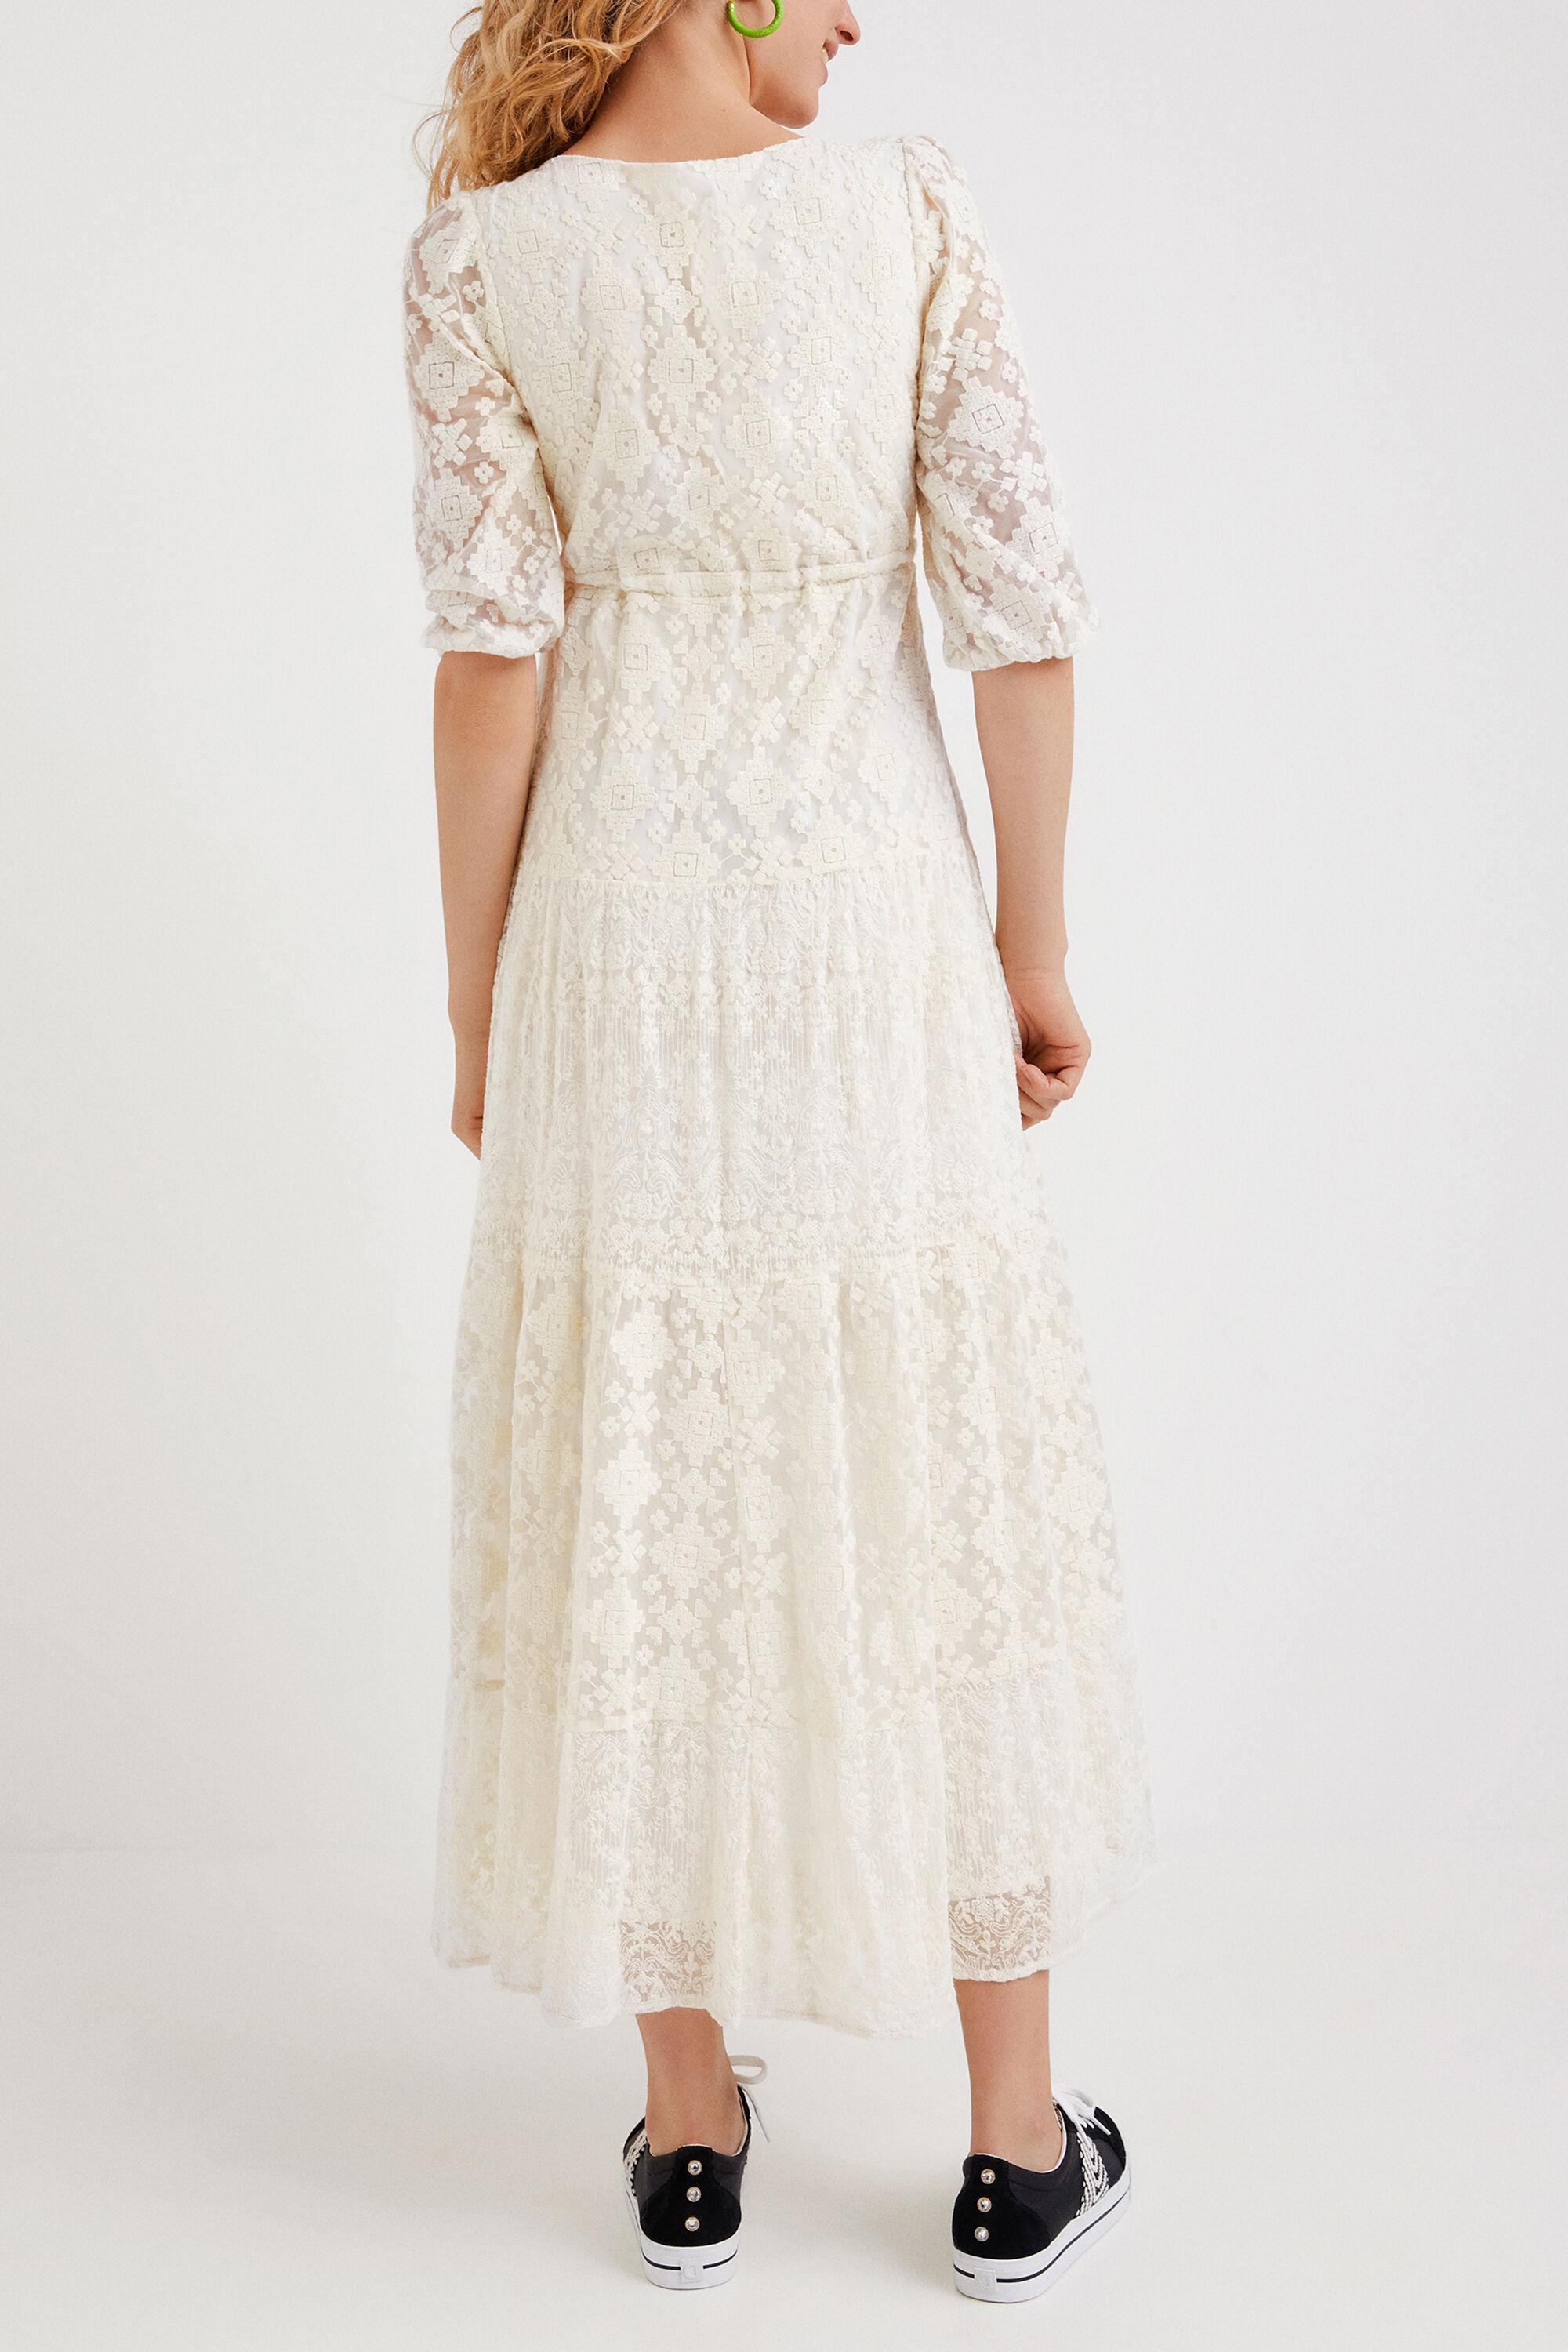 Desigual Embroidery Maxi Dress in White | Lyst